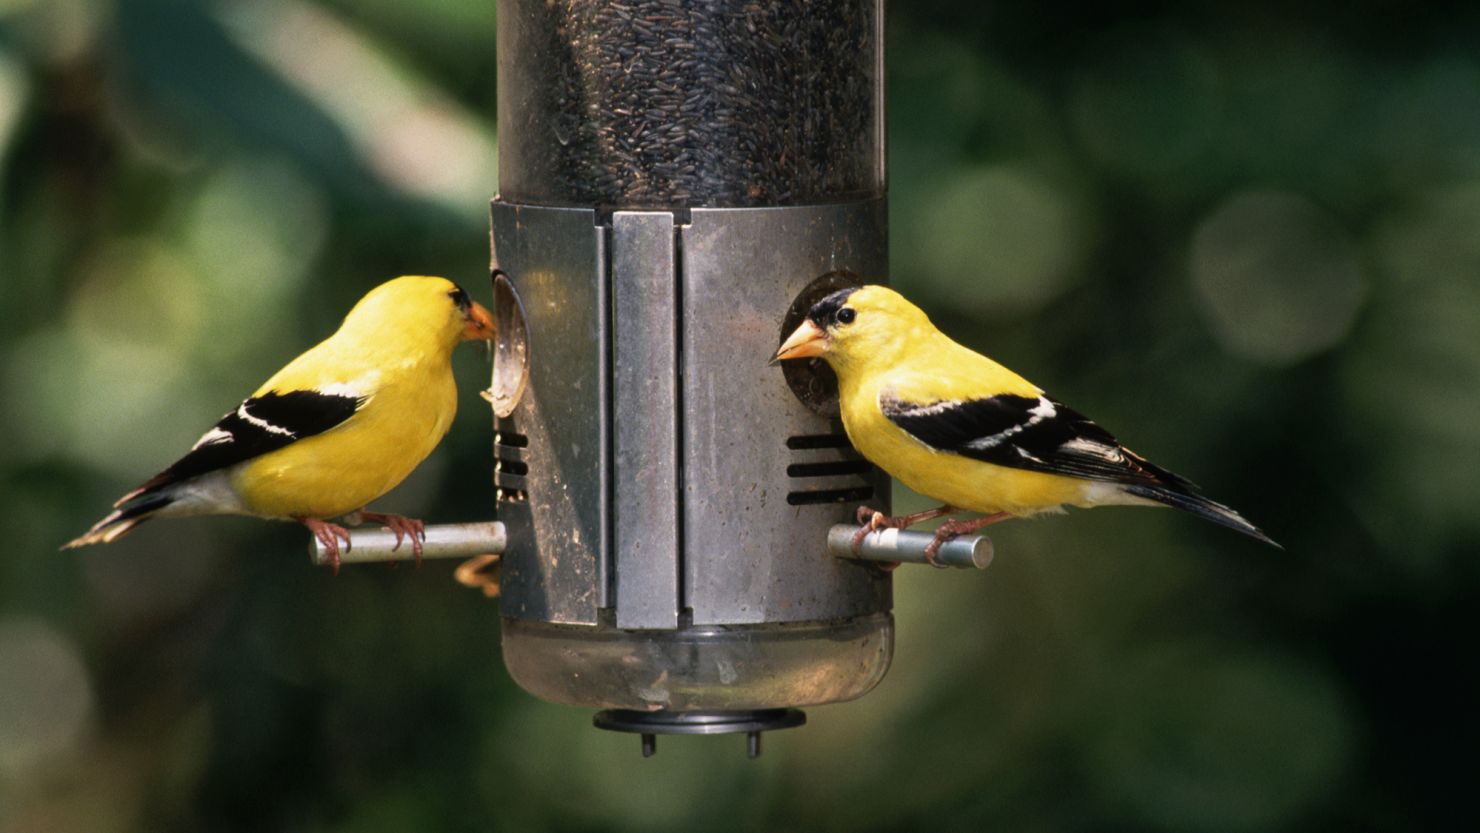 American goldfinches at a bird feeder.